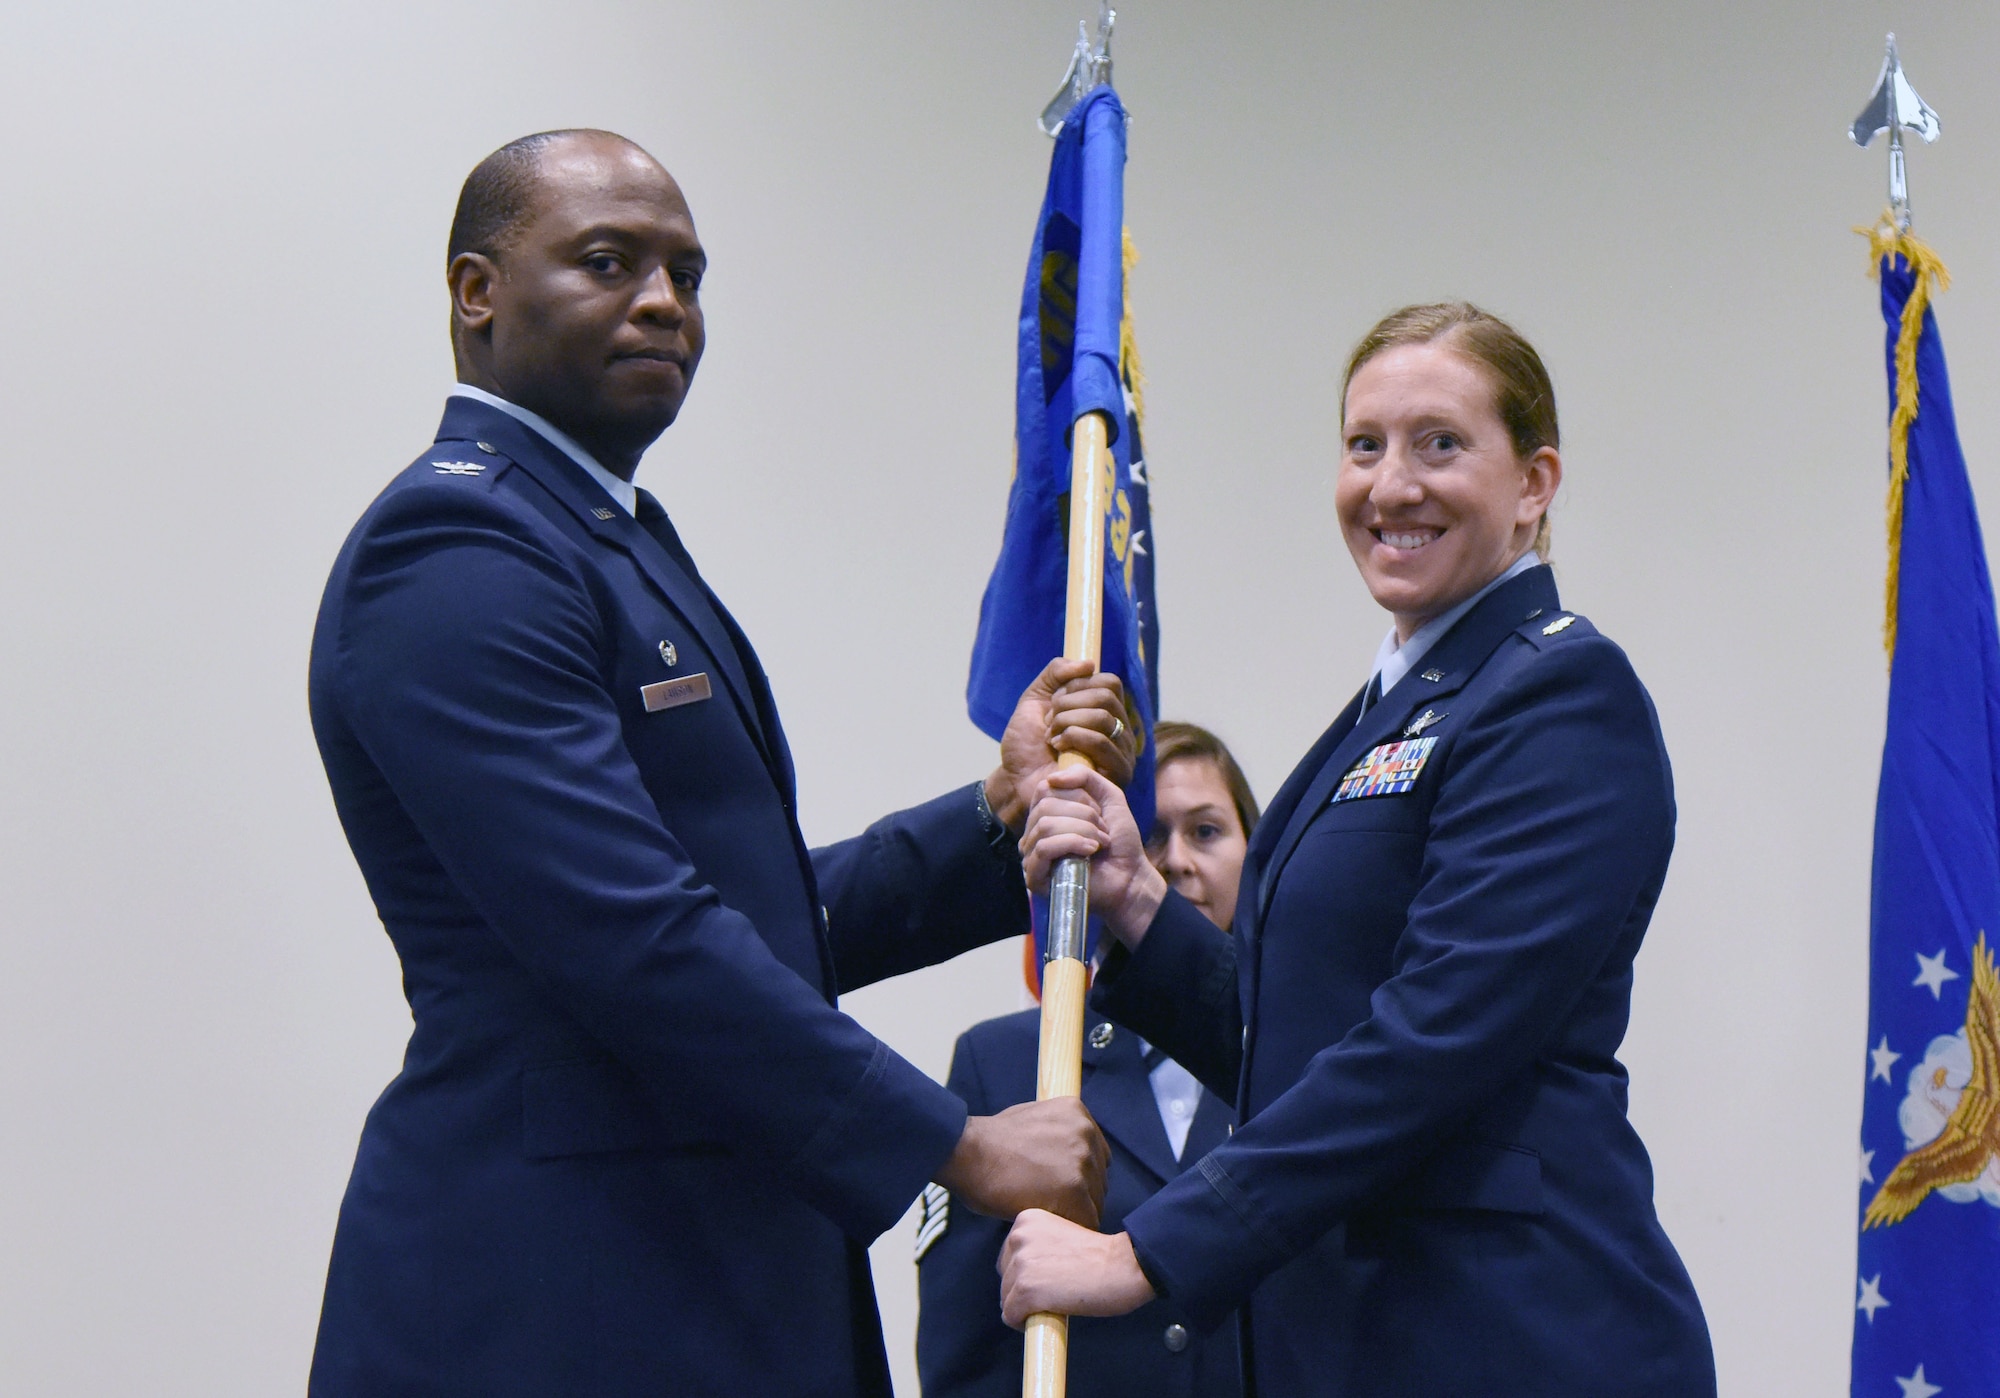 U.S. Air Force Col. Leo Lawson, Jr., 81st Training Group commander, passes the 336th Training Squadron guidon to Maj. Jill Heliker, 336th TRS commander, during the 336th TRS change of command ceremony in the Roberts Consolidated Aircraft Maintenance Facility at Keesler Air Force Base, Mississippi, July 23, 2018. The passing of the guidon is a ceremonial symbol of exchanging command from one commander to another. (U.S. Air Force photo by Kemberly Groue)